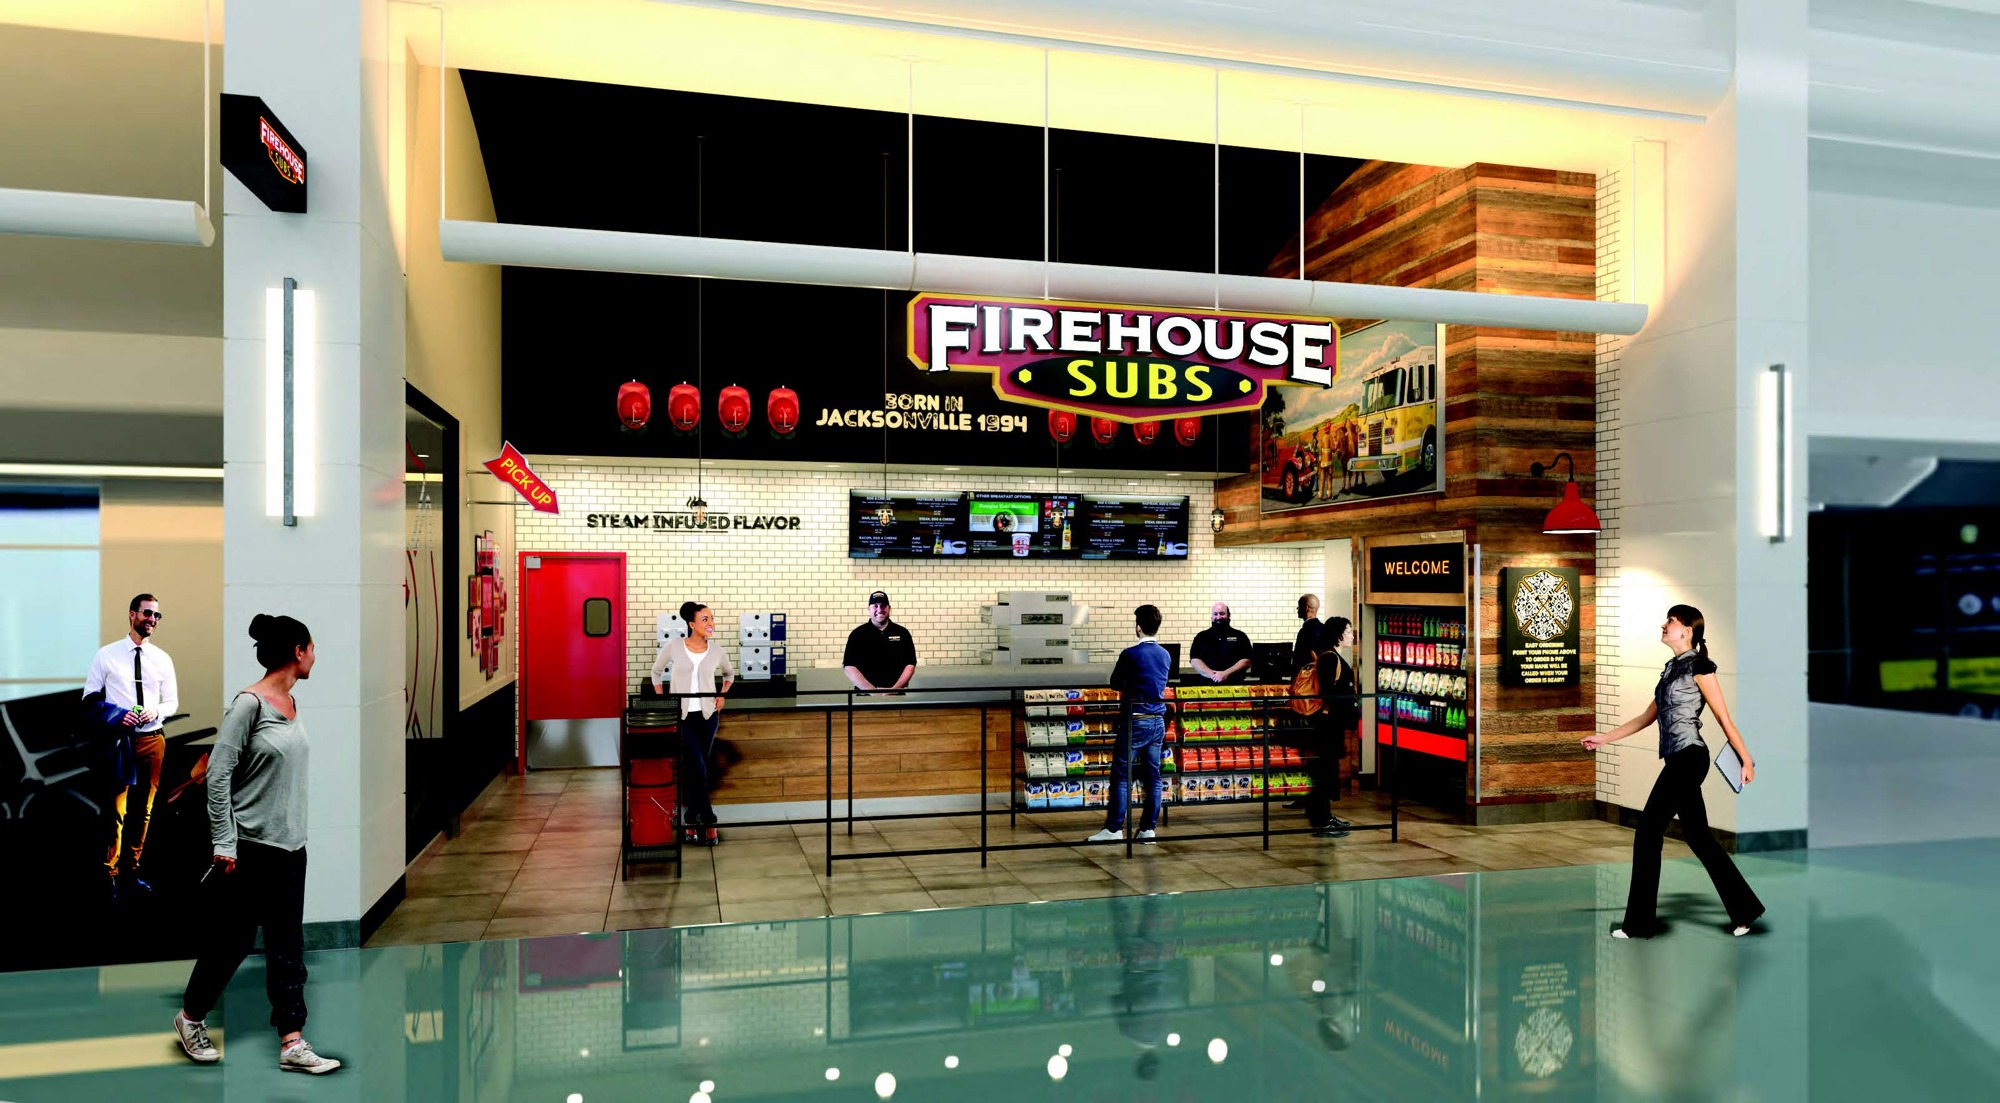 Firehouse Subs will move to Concourse C to replace “The Local.”